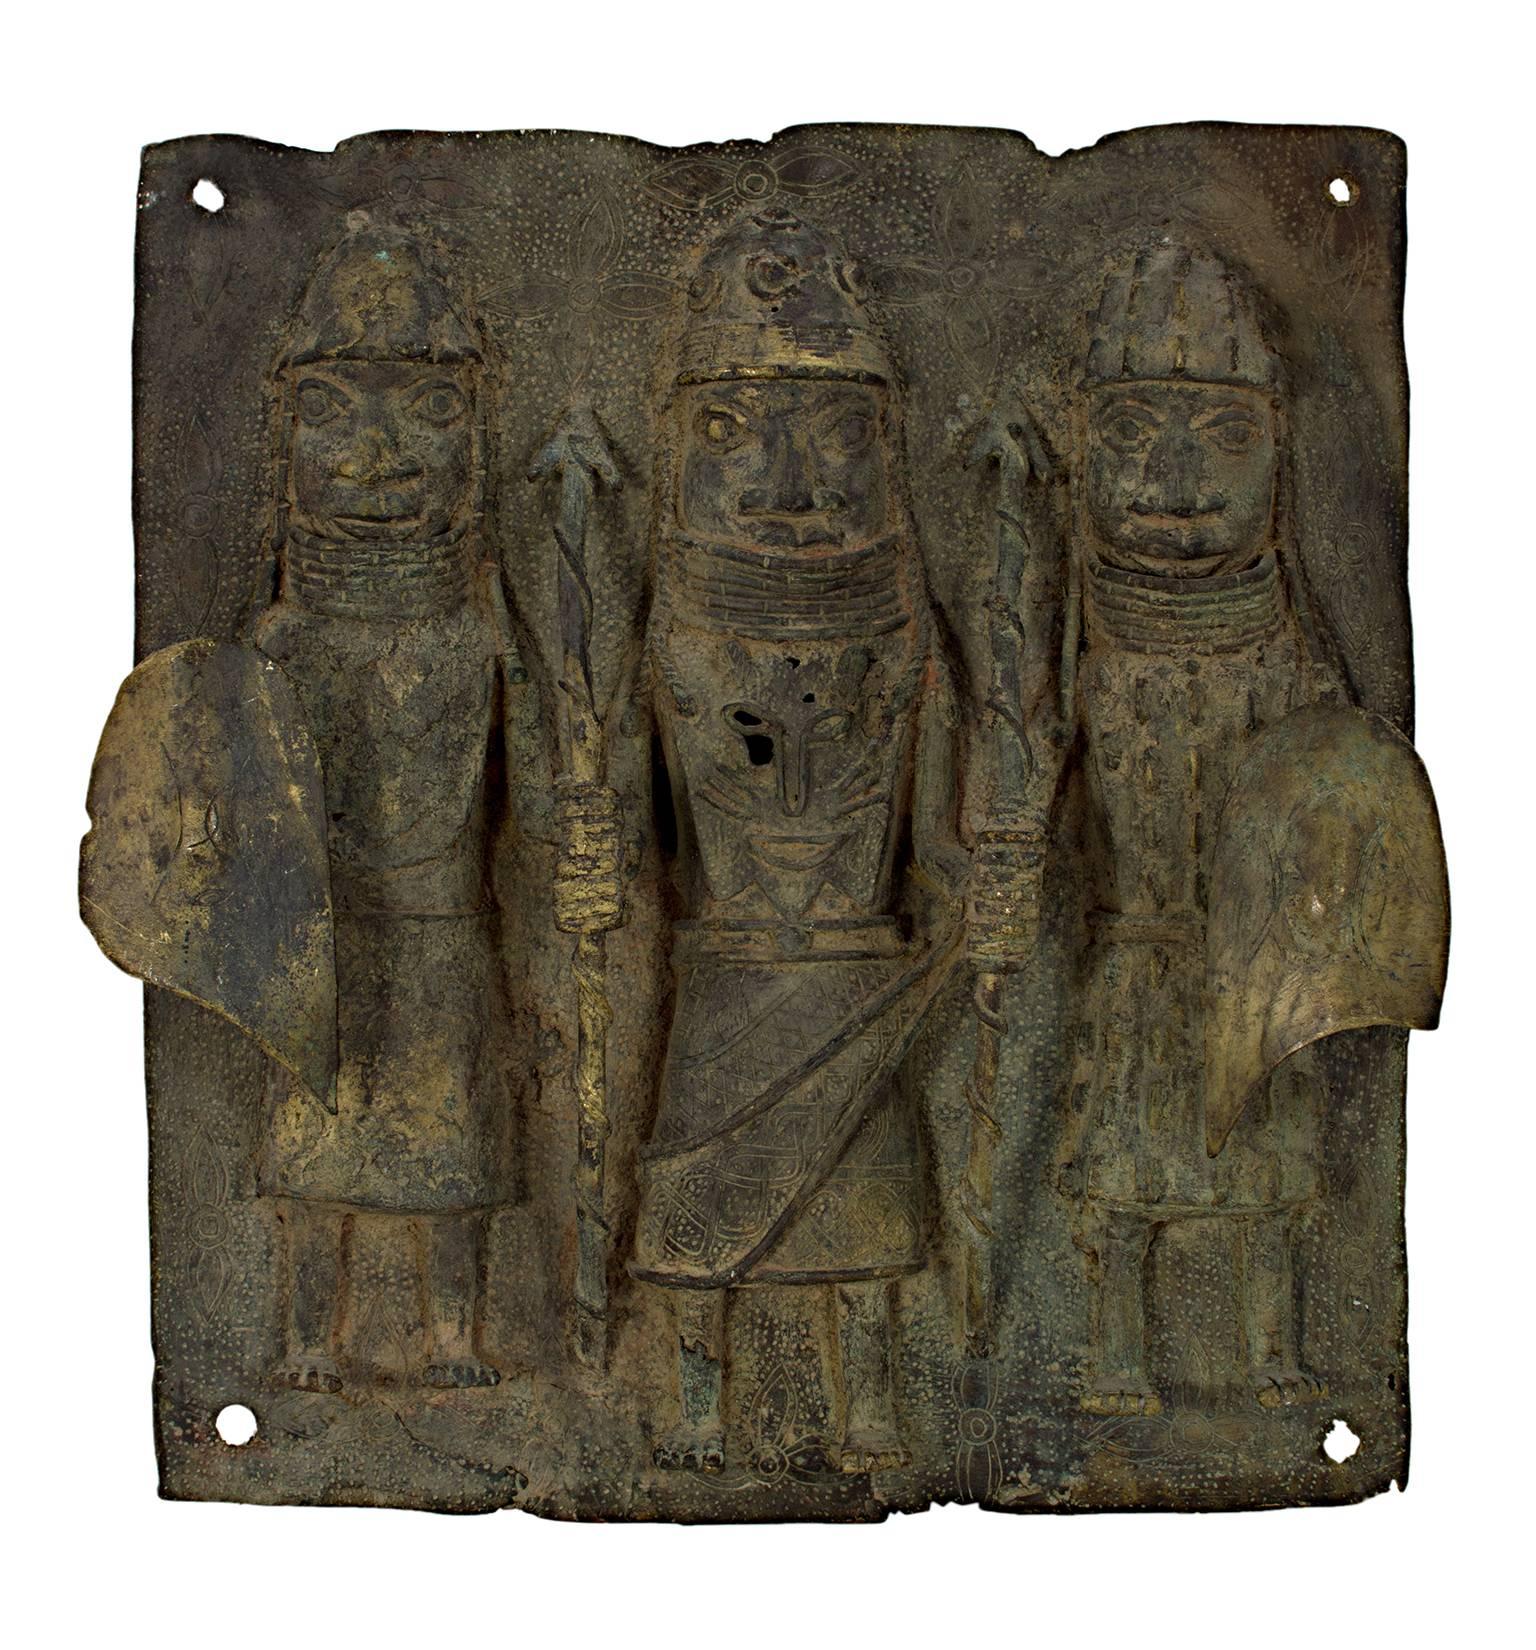 Unknown Figurative Sculpture - "King with Two Tribesmen Nigeria- Benin Tribe, " a Bronze Relief Sculpture